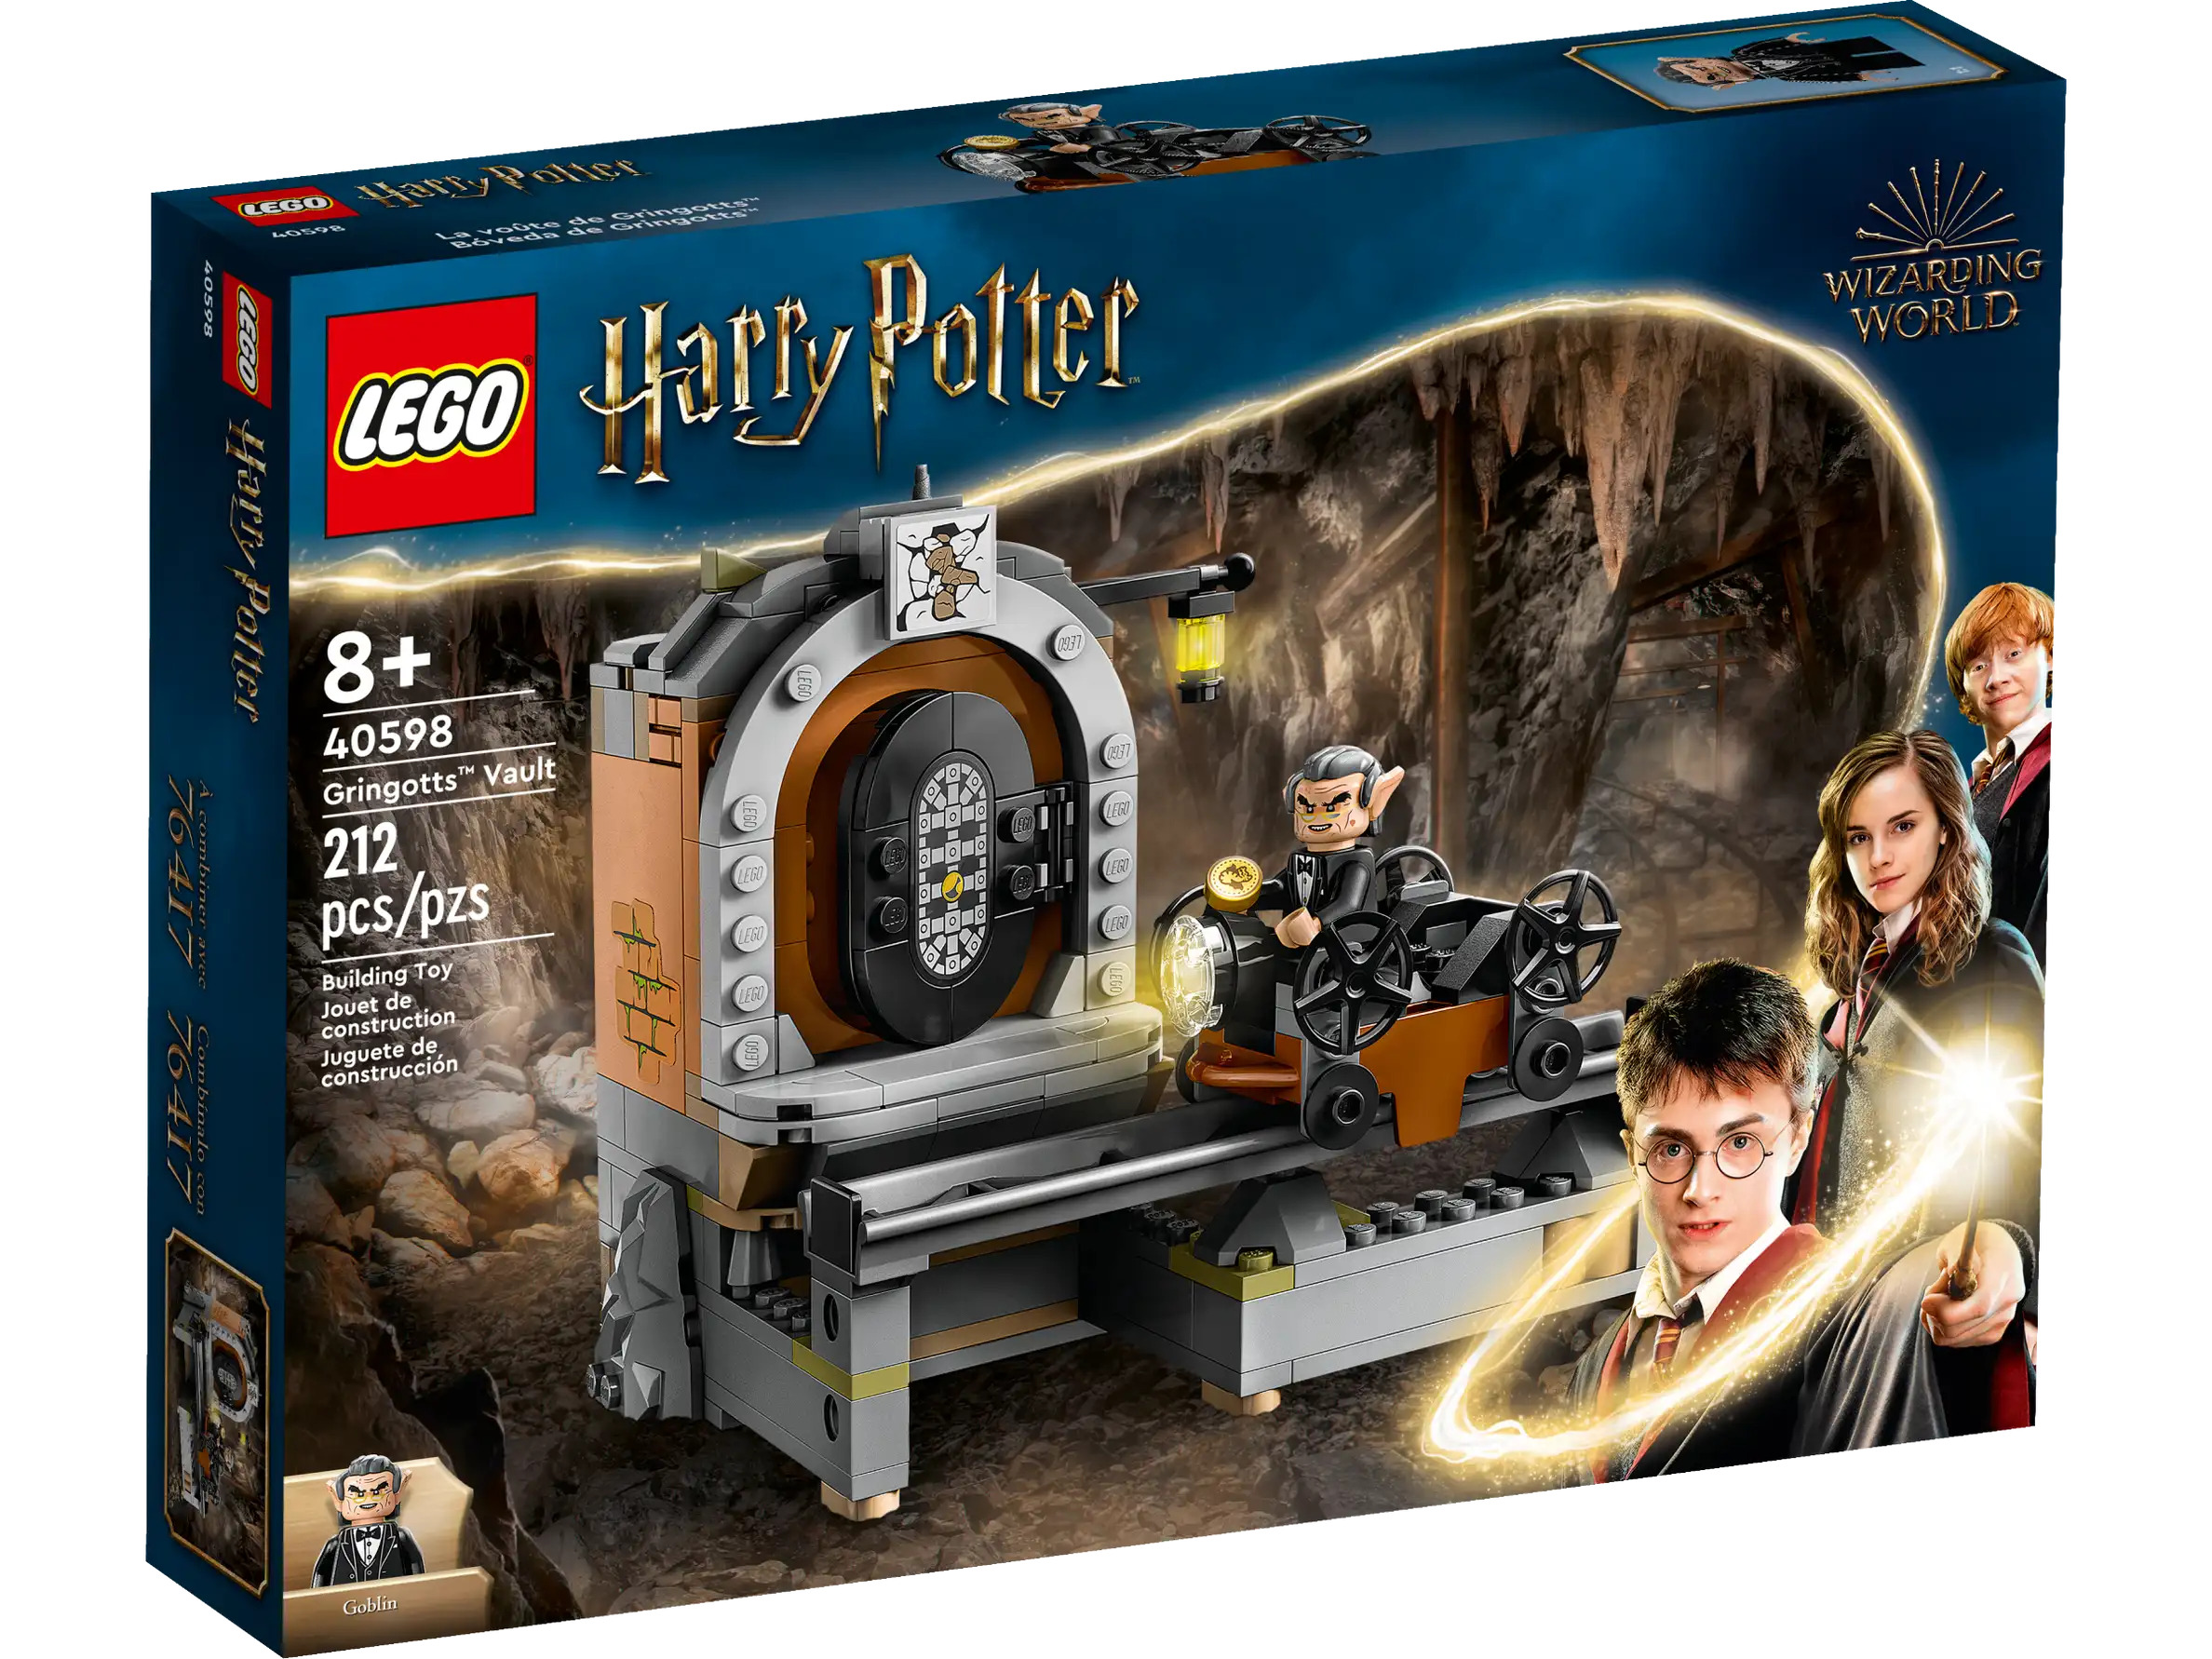 LEGO Harry Potter Quidditch Practice 30651 Building Toy